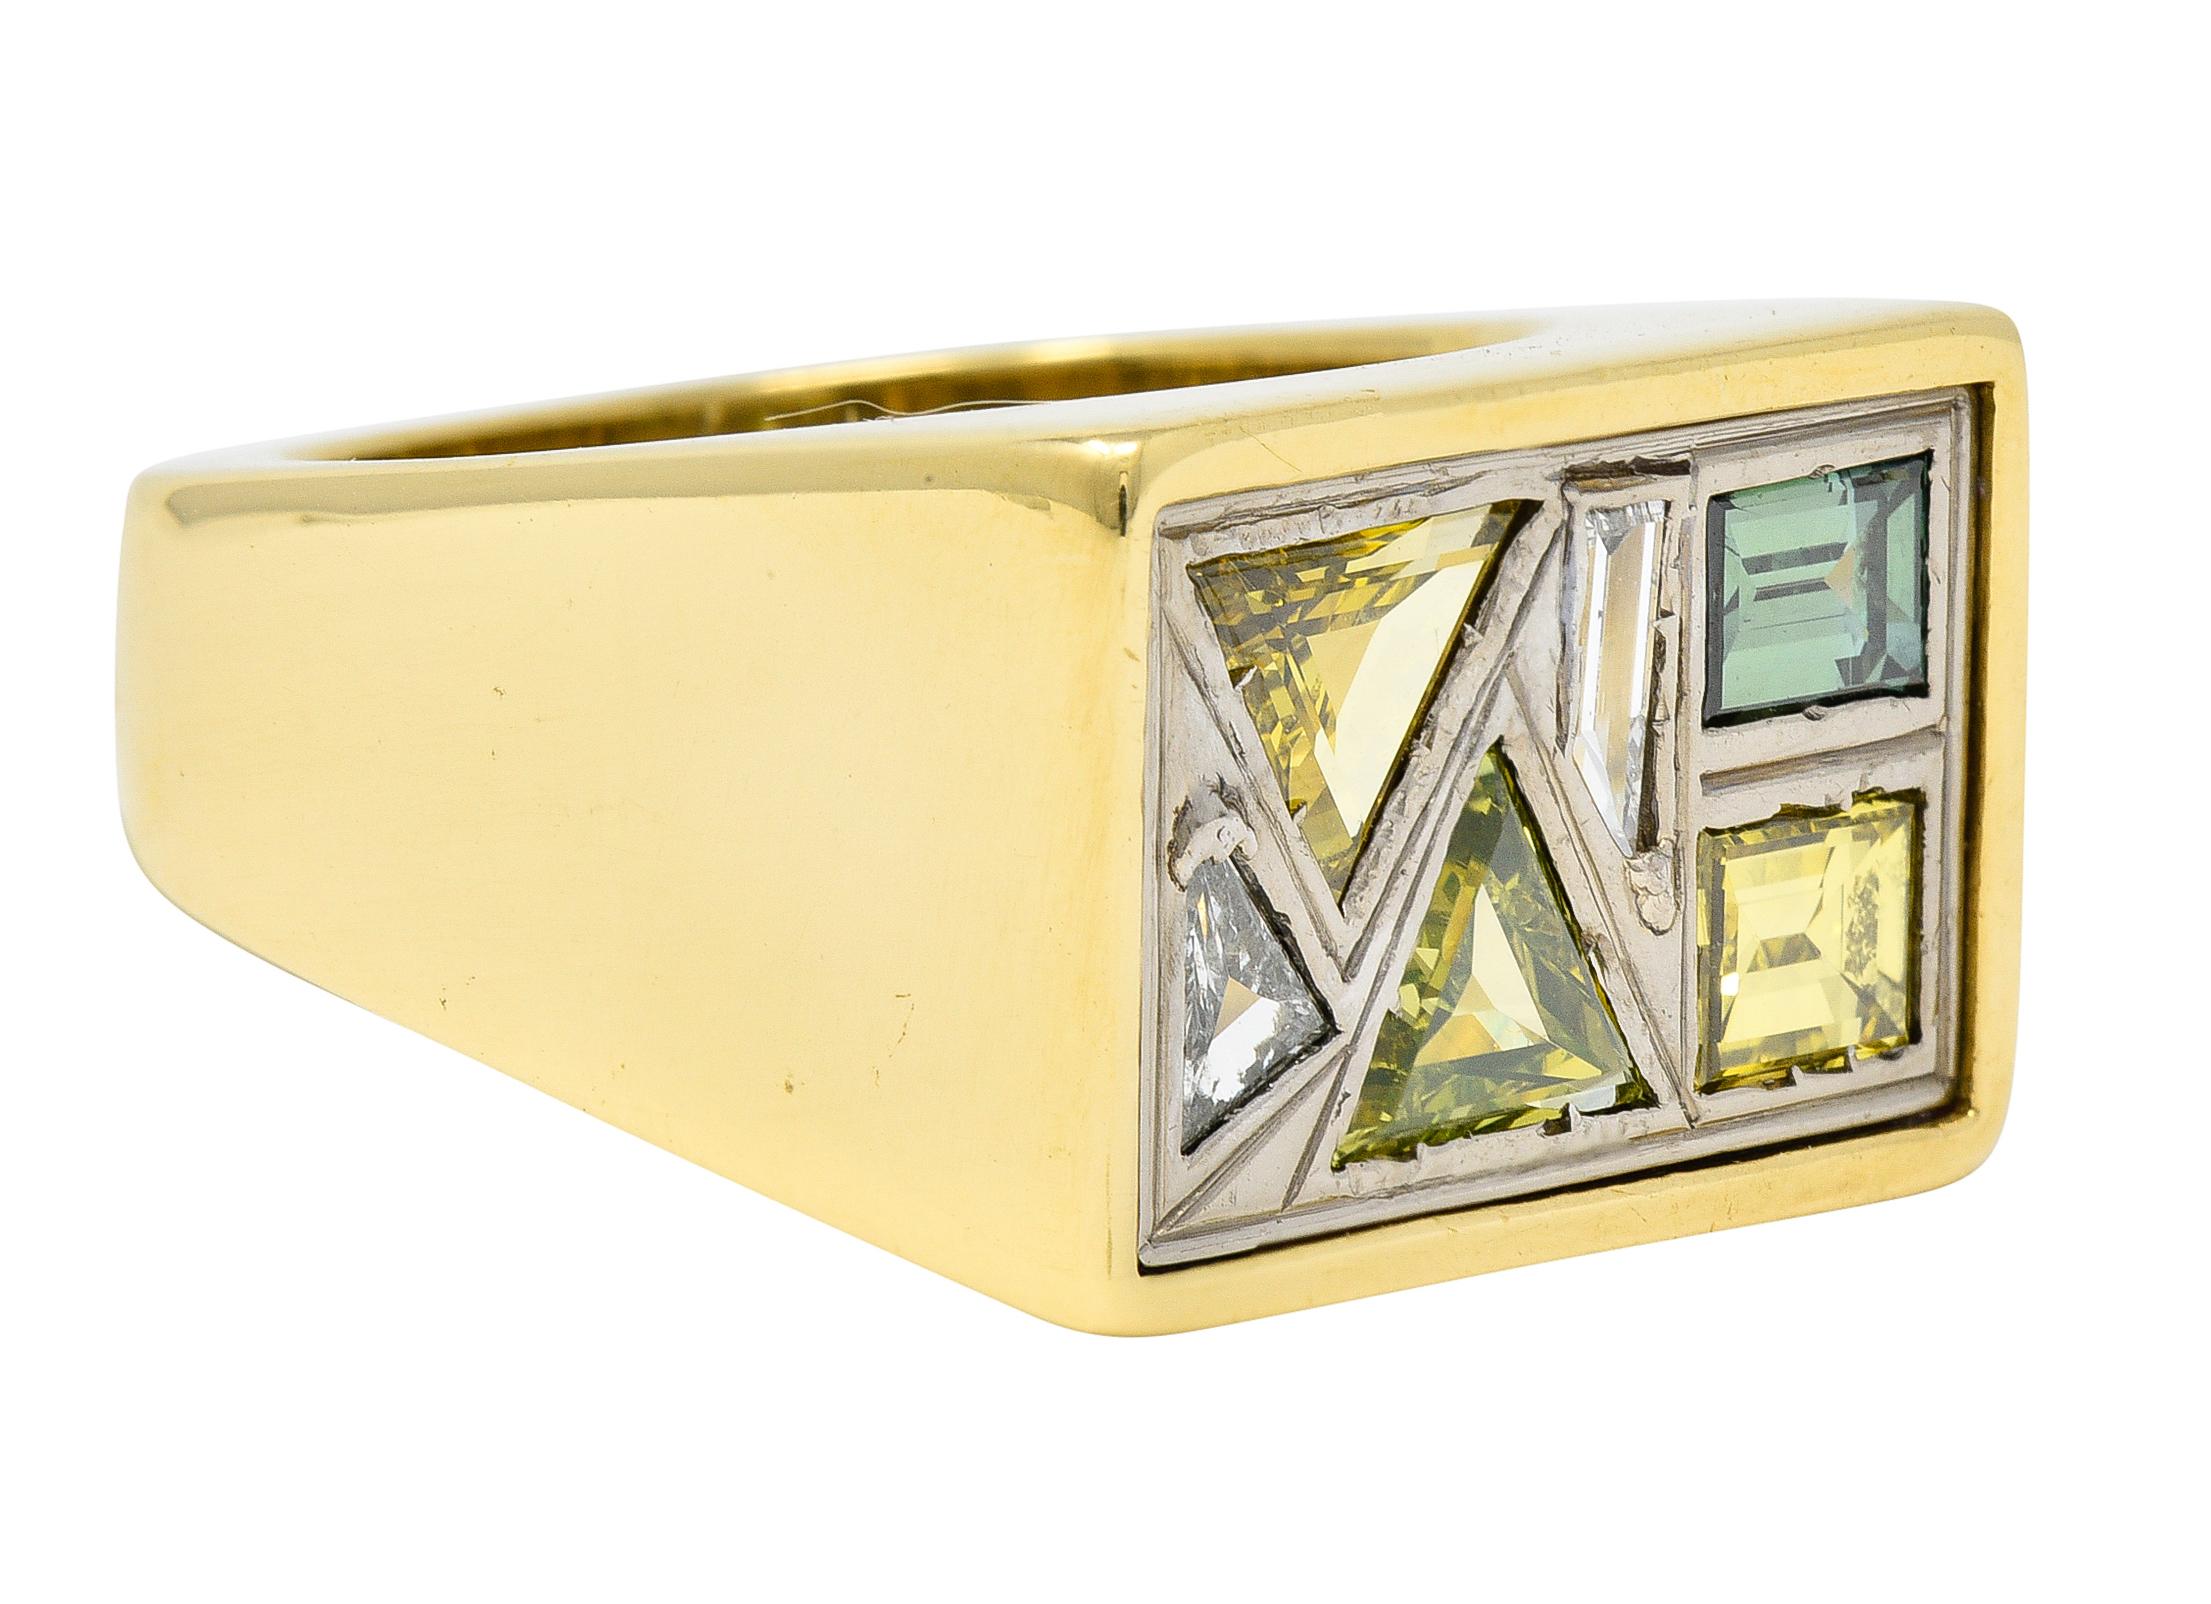 Featuring baguette, trilliant, and trapezoid cut diamonds flush set in recessed white gold panel. Fancy colored light blue, light yellow, greenish blue, greenish yellow, medium yellow, and white. Weighing approximately 2.84 carats total with VS